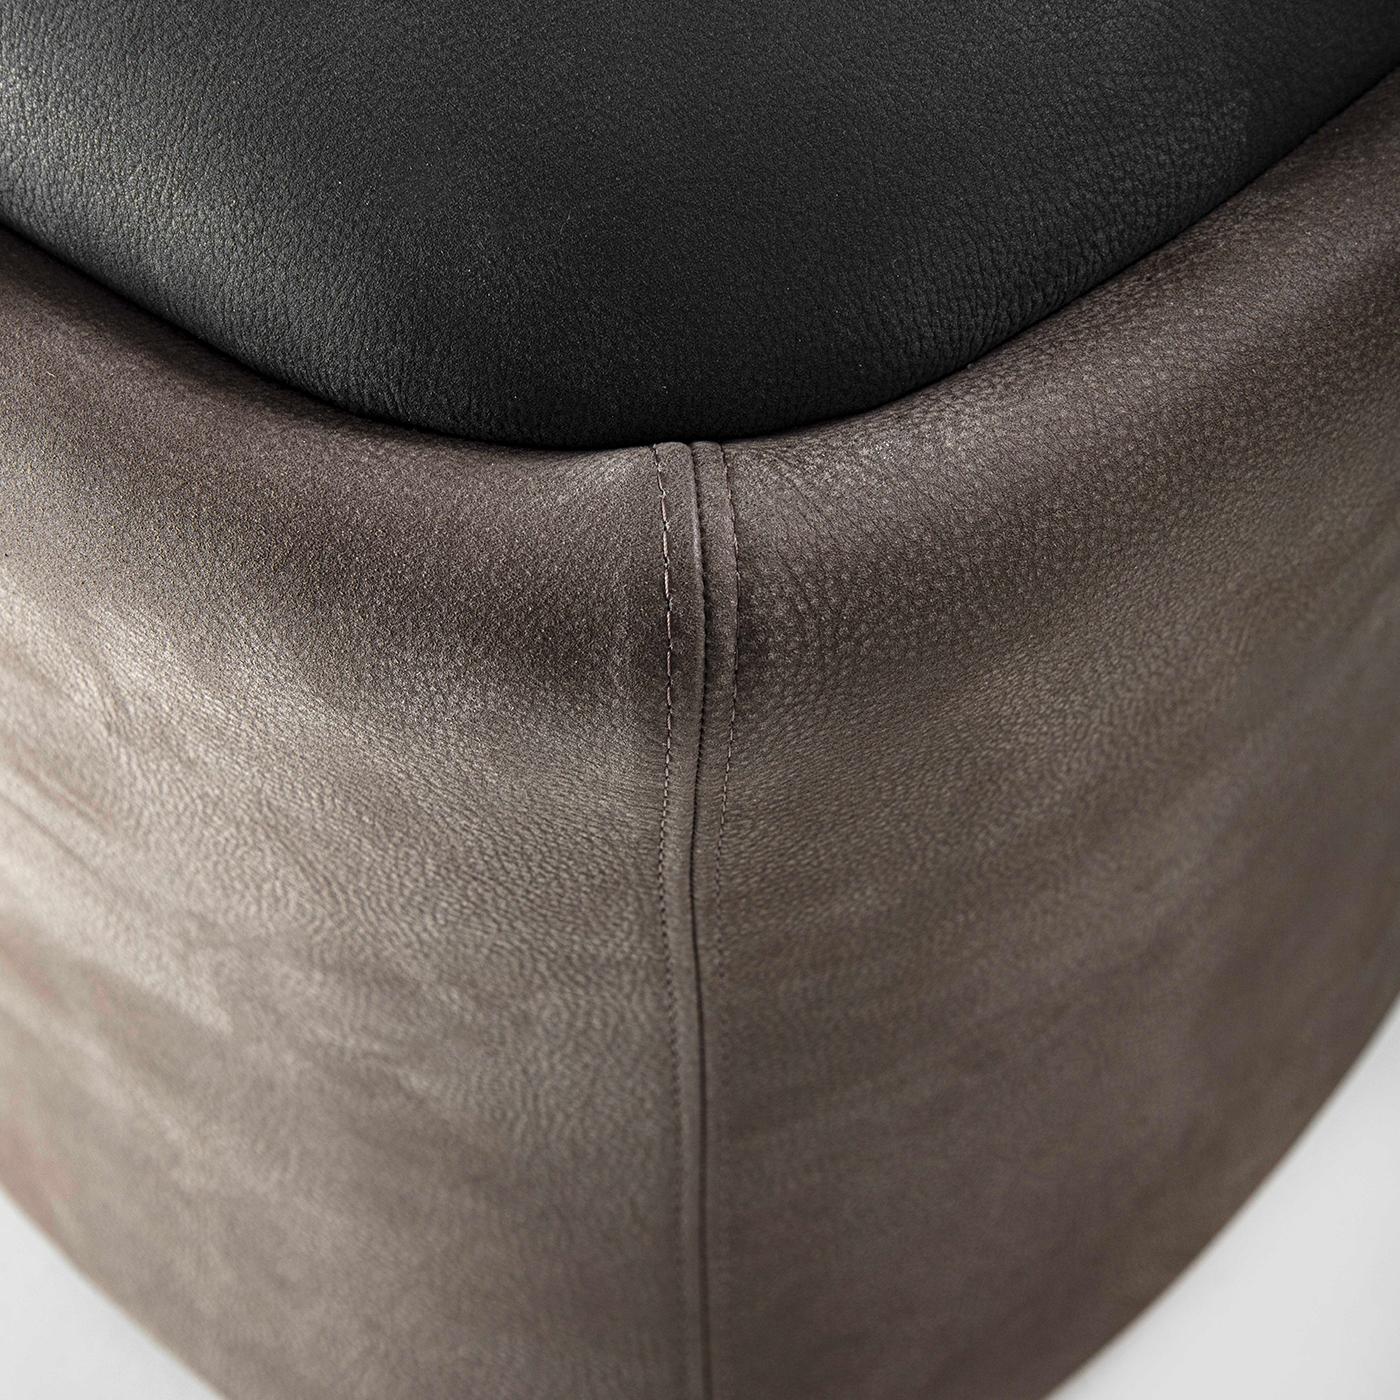 This compact pouf luxuriously covered in fine leather is a sophisticated design ideal to provide an extra seat for an unexpected guest or a plump footrest after a long workday. Perfect to complement refined modern homes marked by neutrals, it is